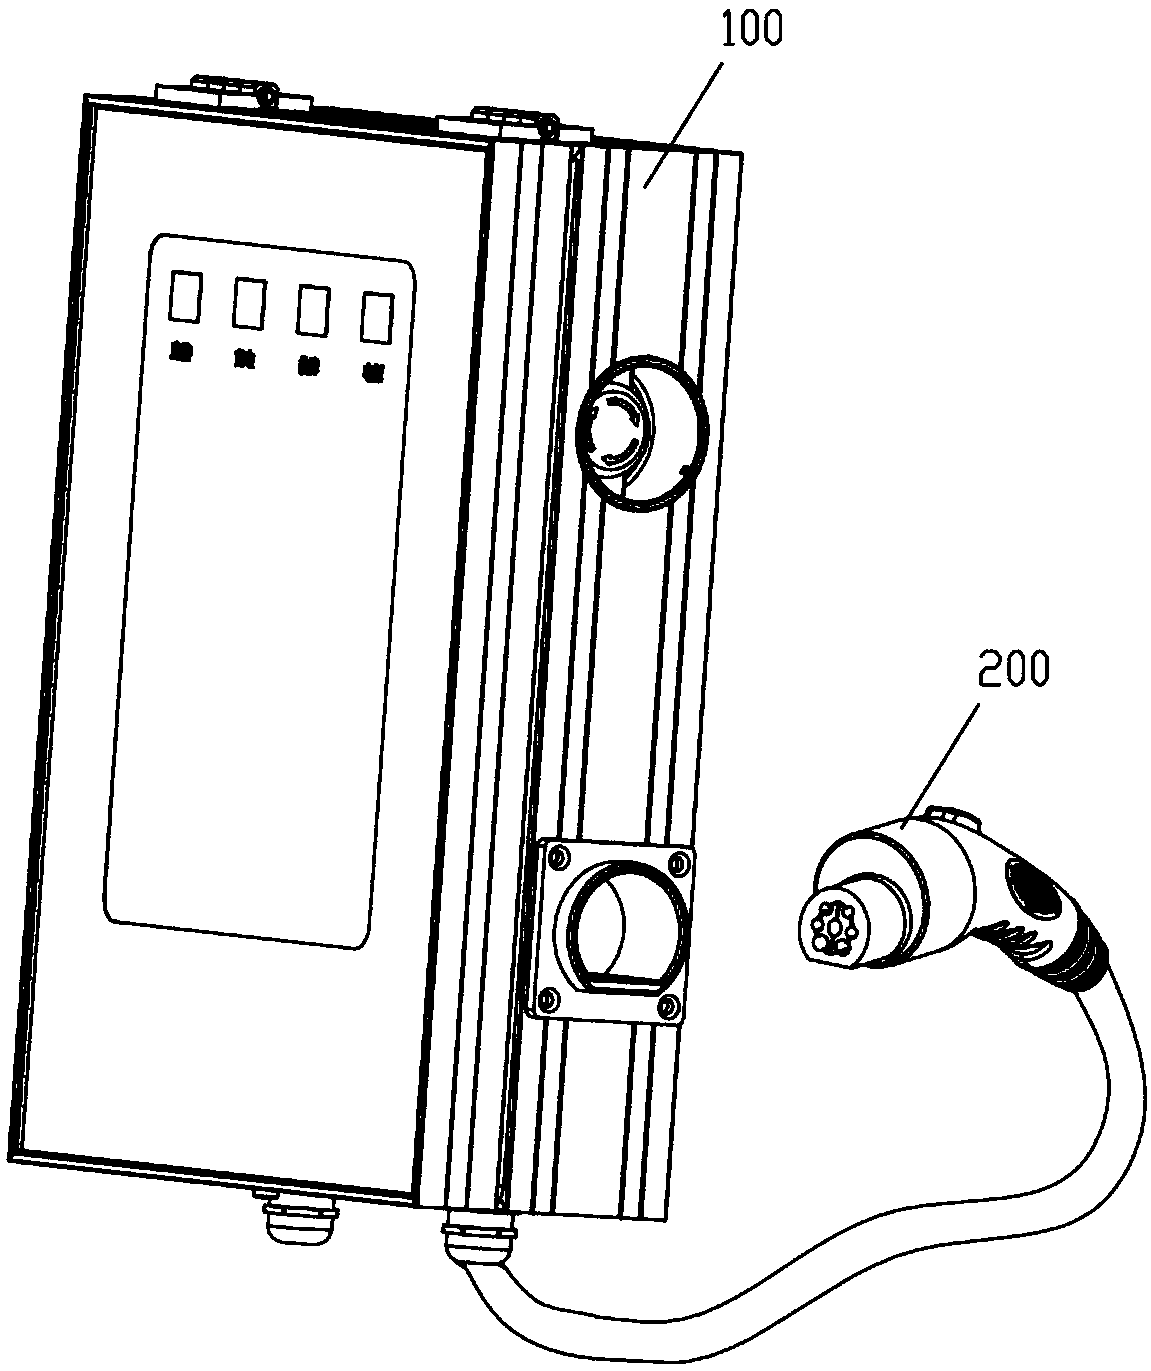 A DC charging pile with fault-clearing function